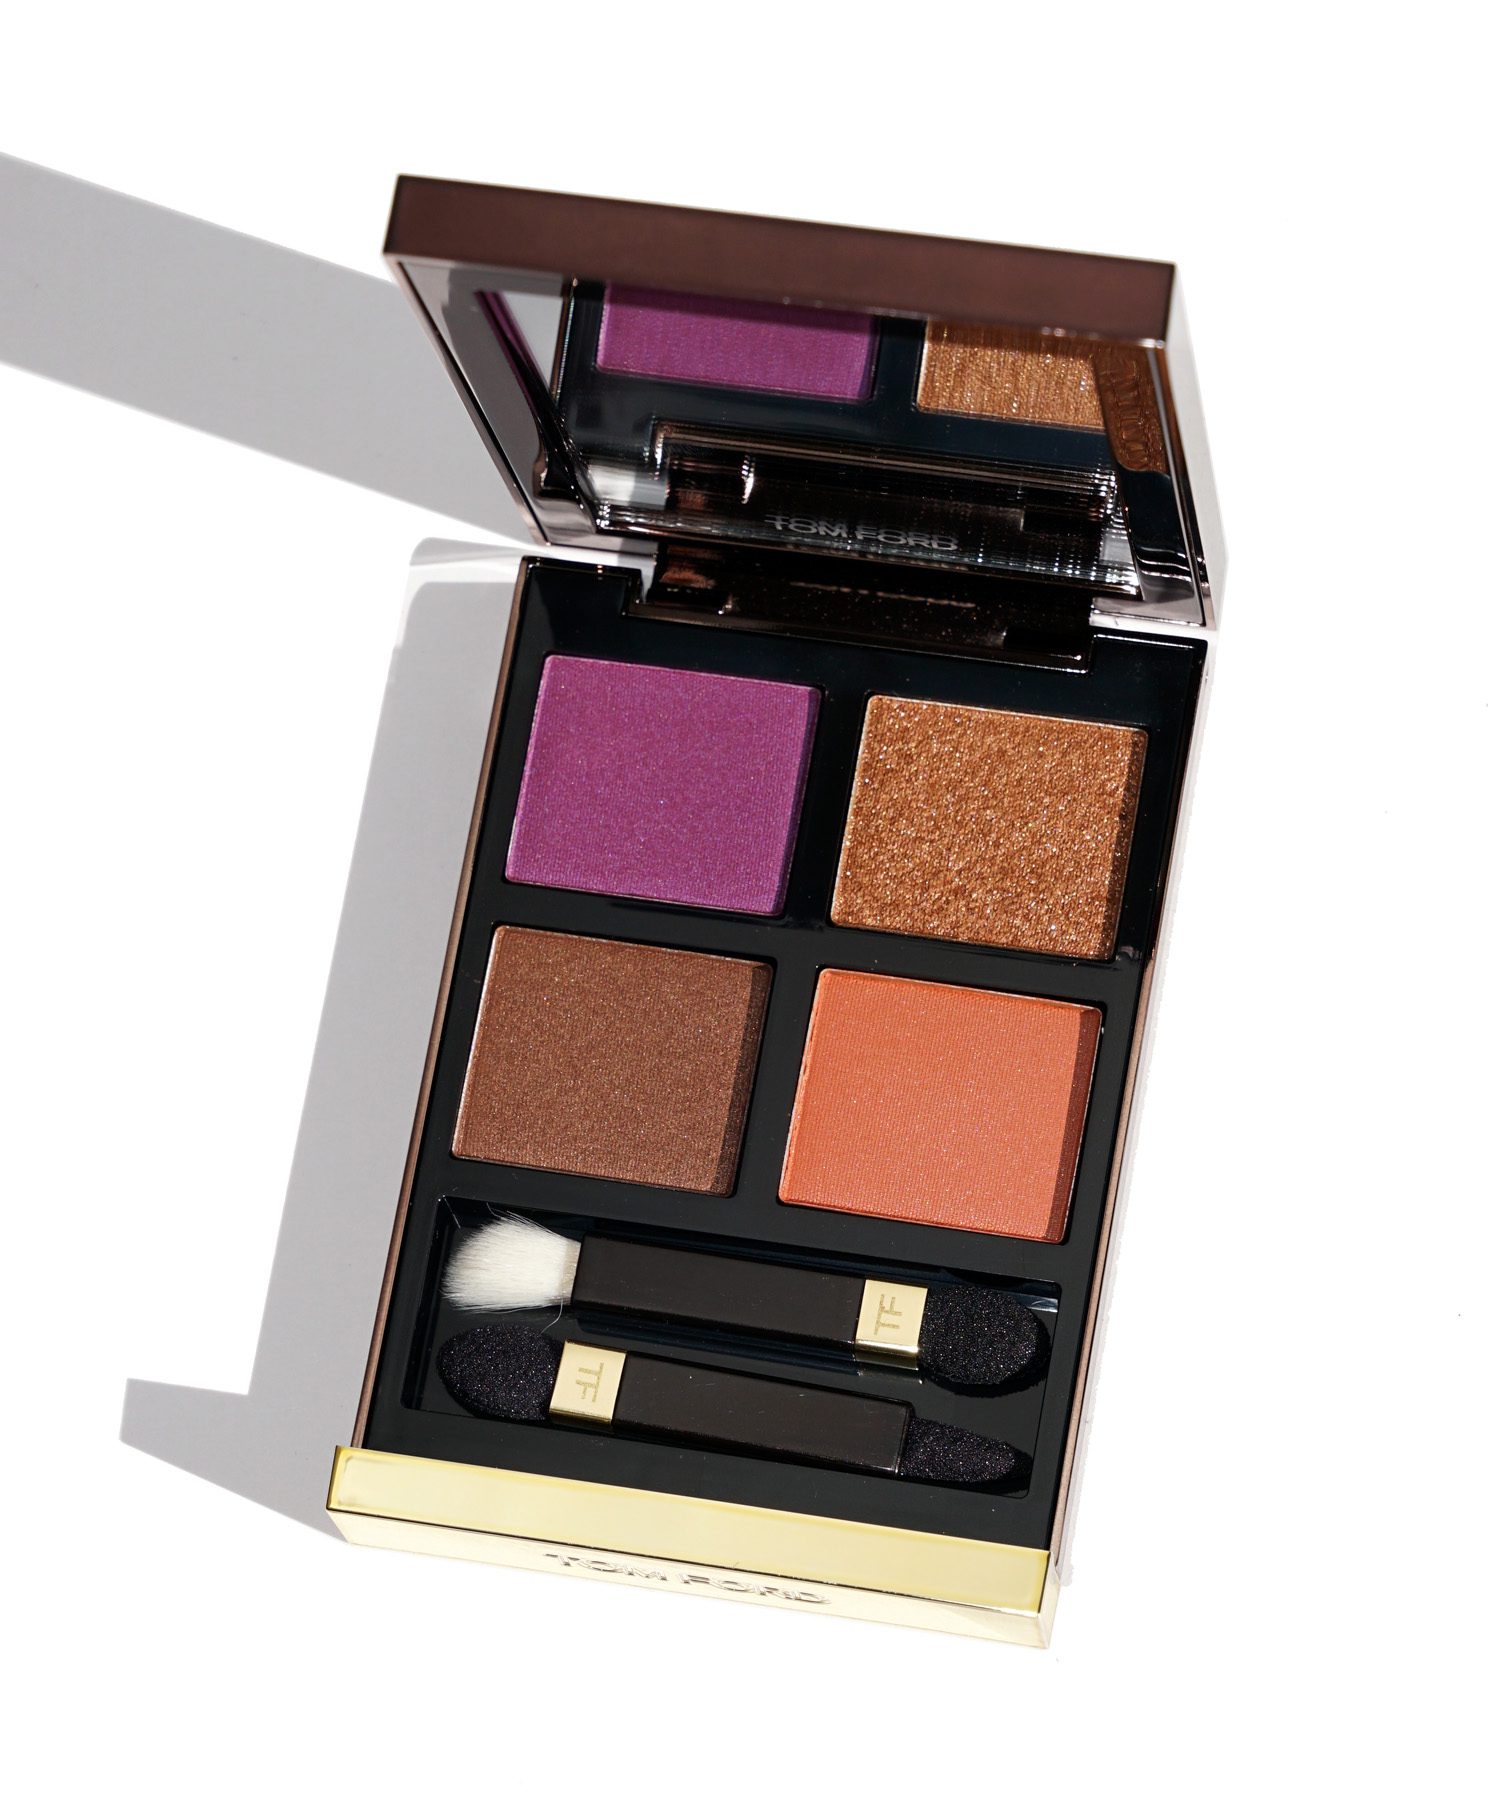 Tom Ford Eye Color Quads New Shades Review + Swatches - The Beauty Look Book